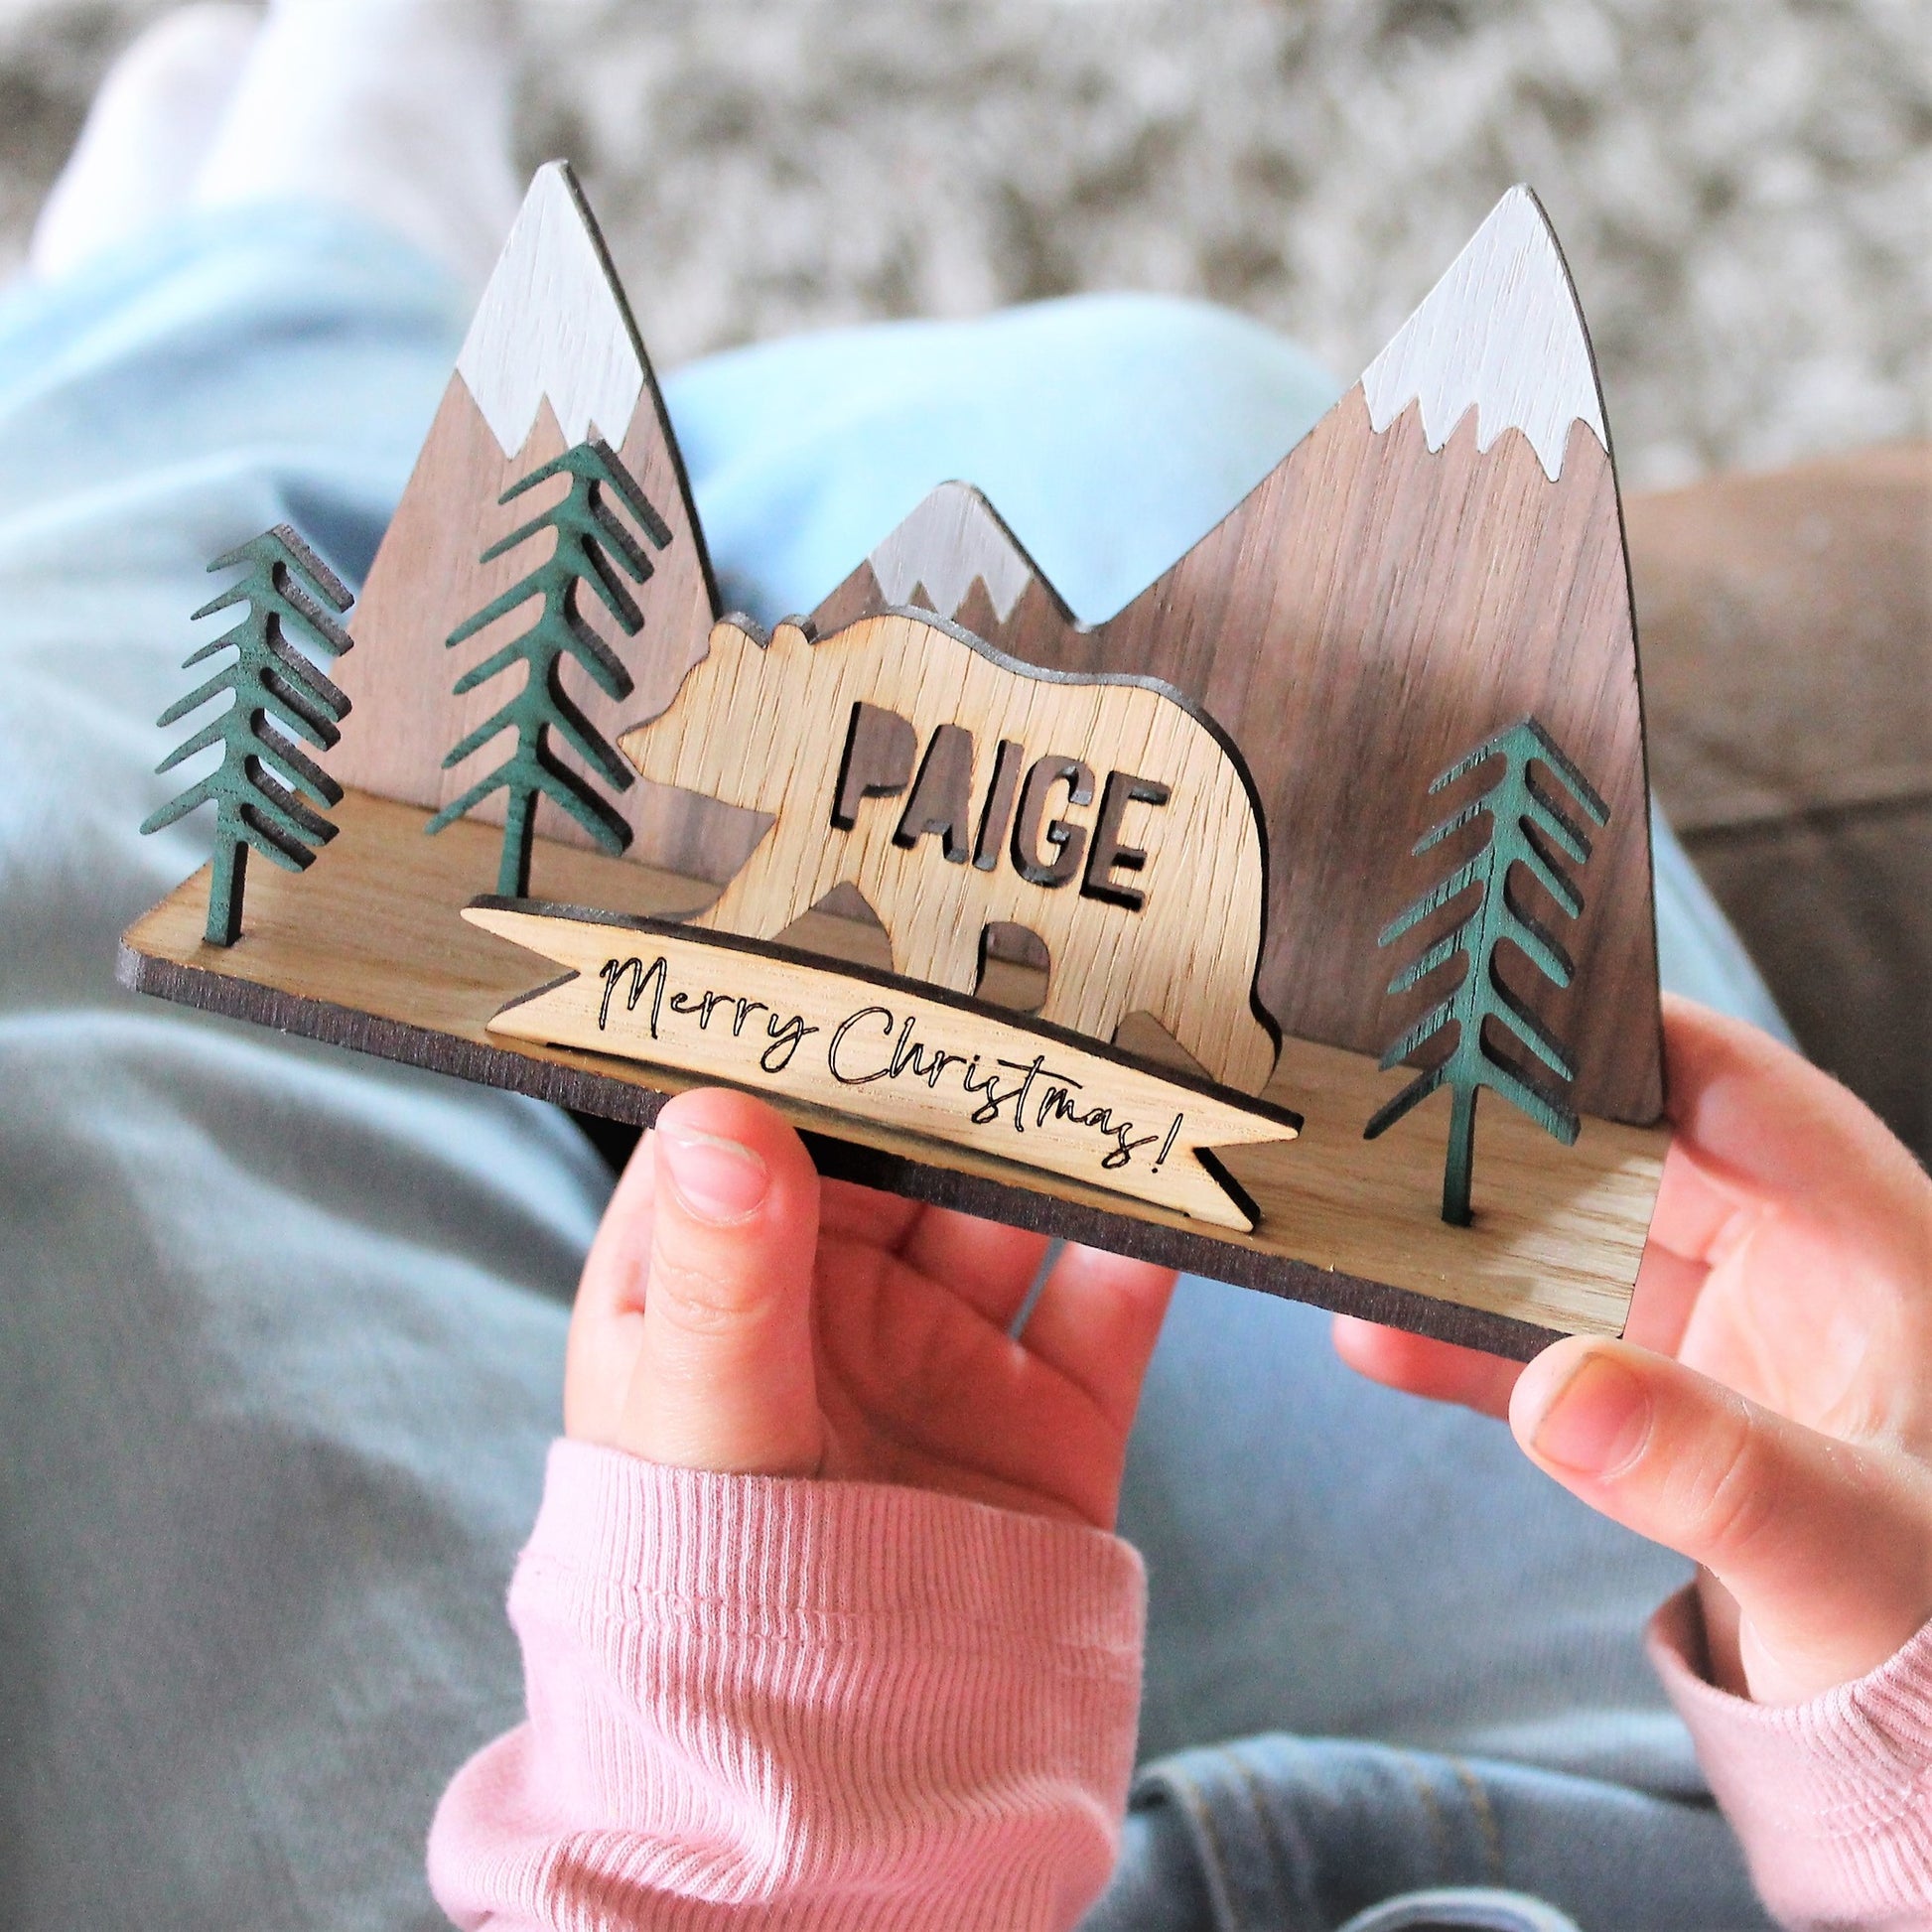 Child, putting together and playing with 3d festive wooden ornament with mountain and forest scene, and a personalised name bear